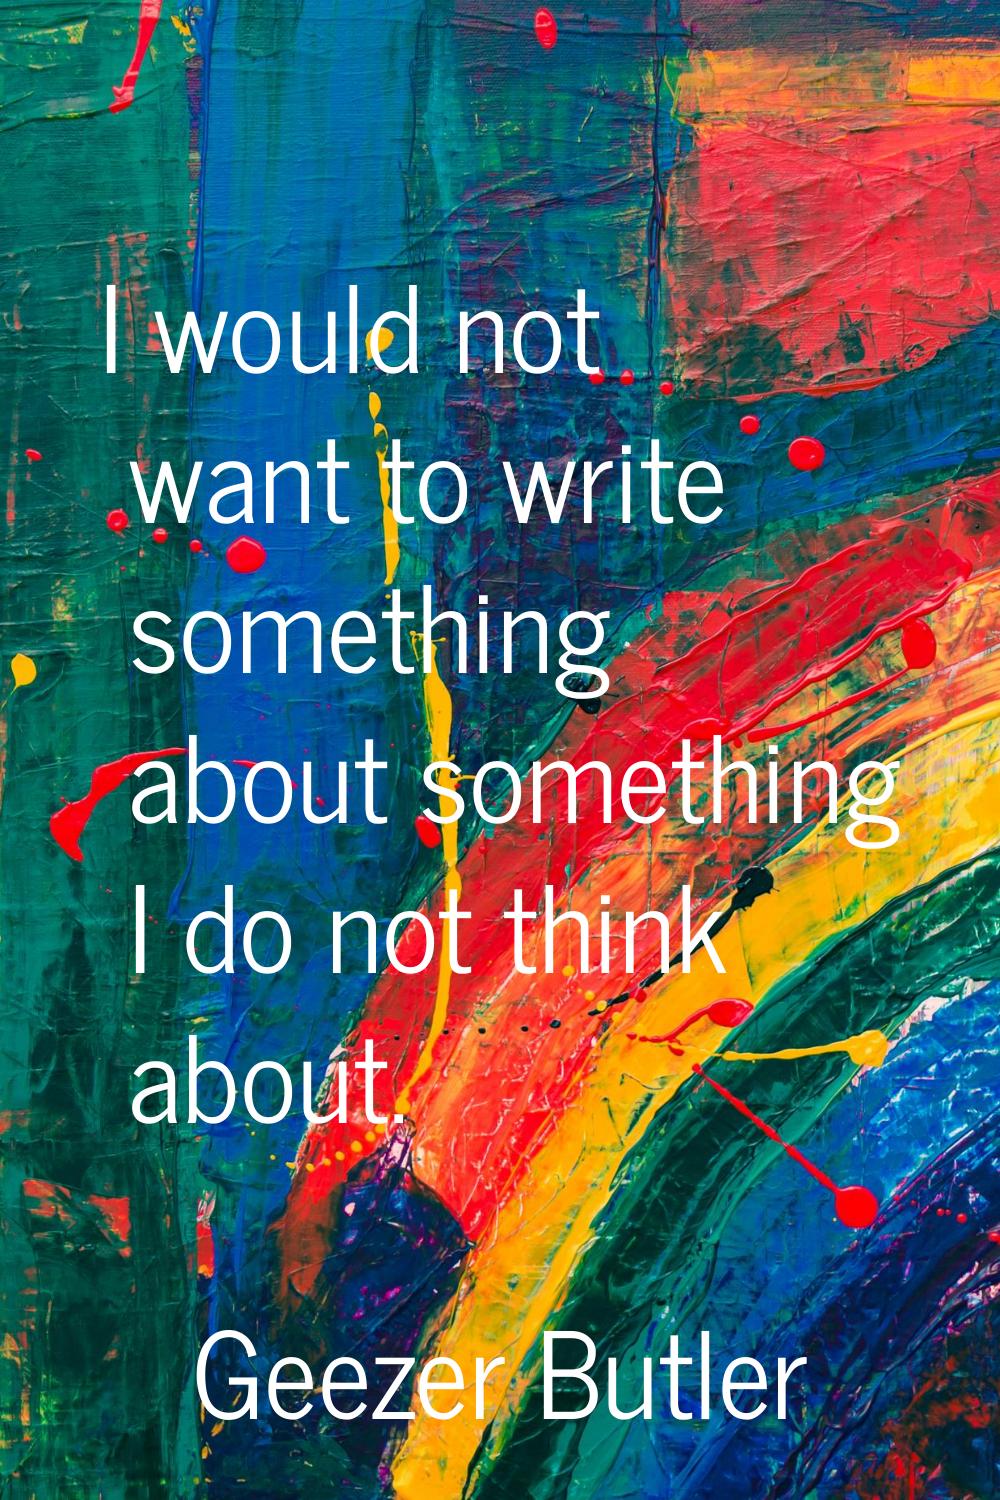 I would not want to write something about something I do not think about.